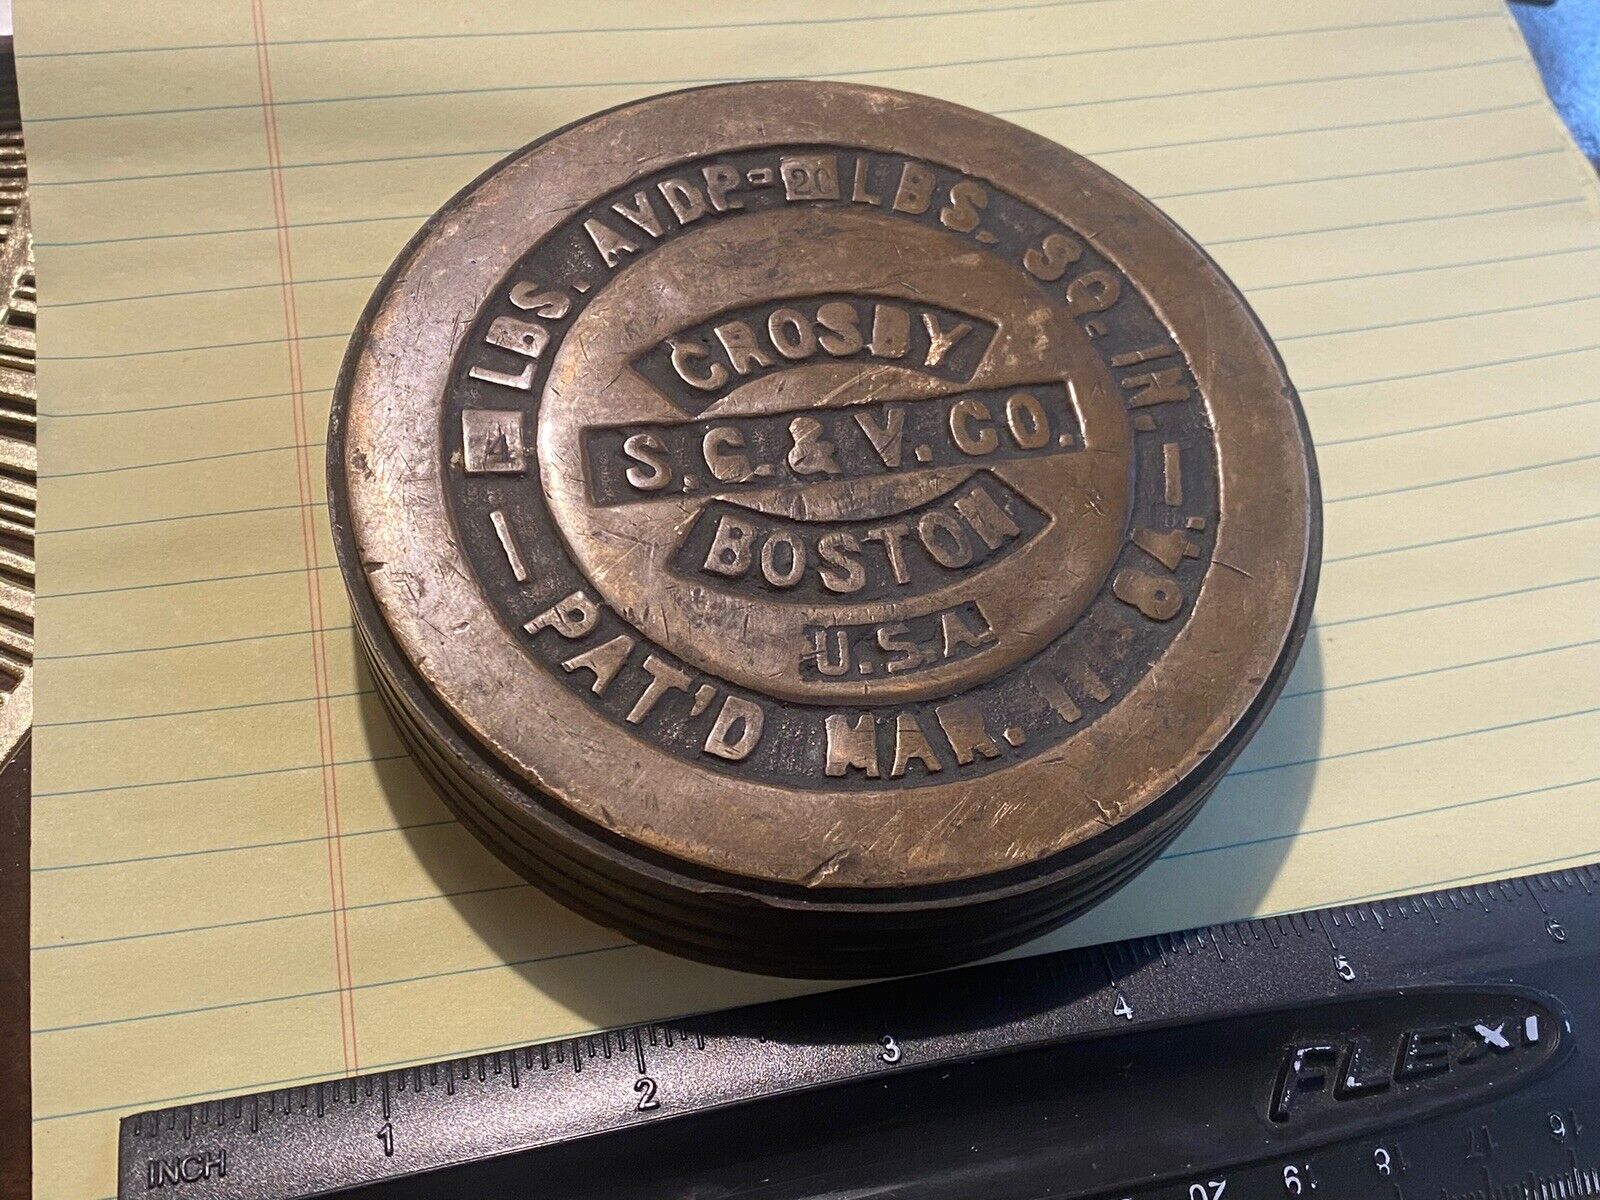 ANTIQUE CROSBY S.G.& V. CO. SOLID BRASS 4LB SCALE WEIGHT BOSTON PATENTED IN 1884